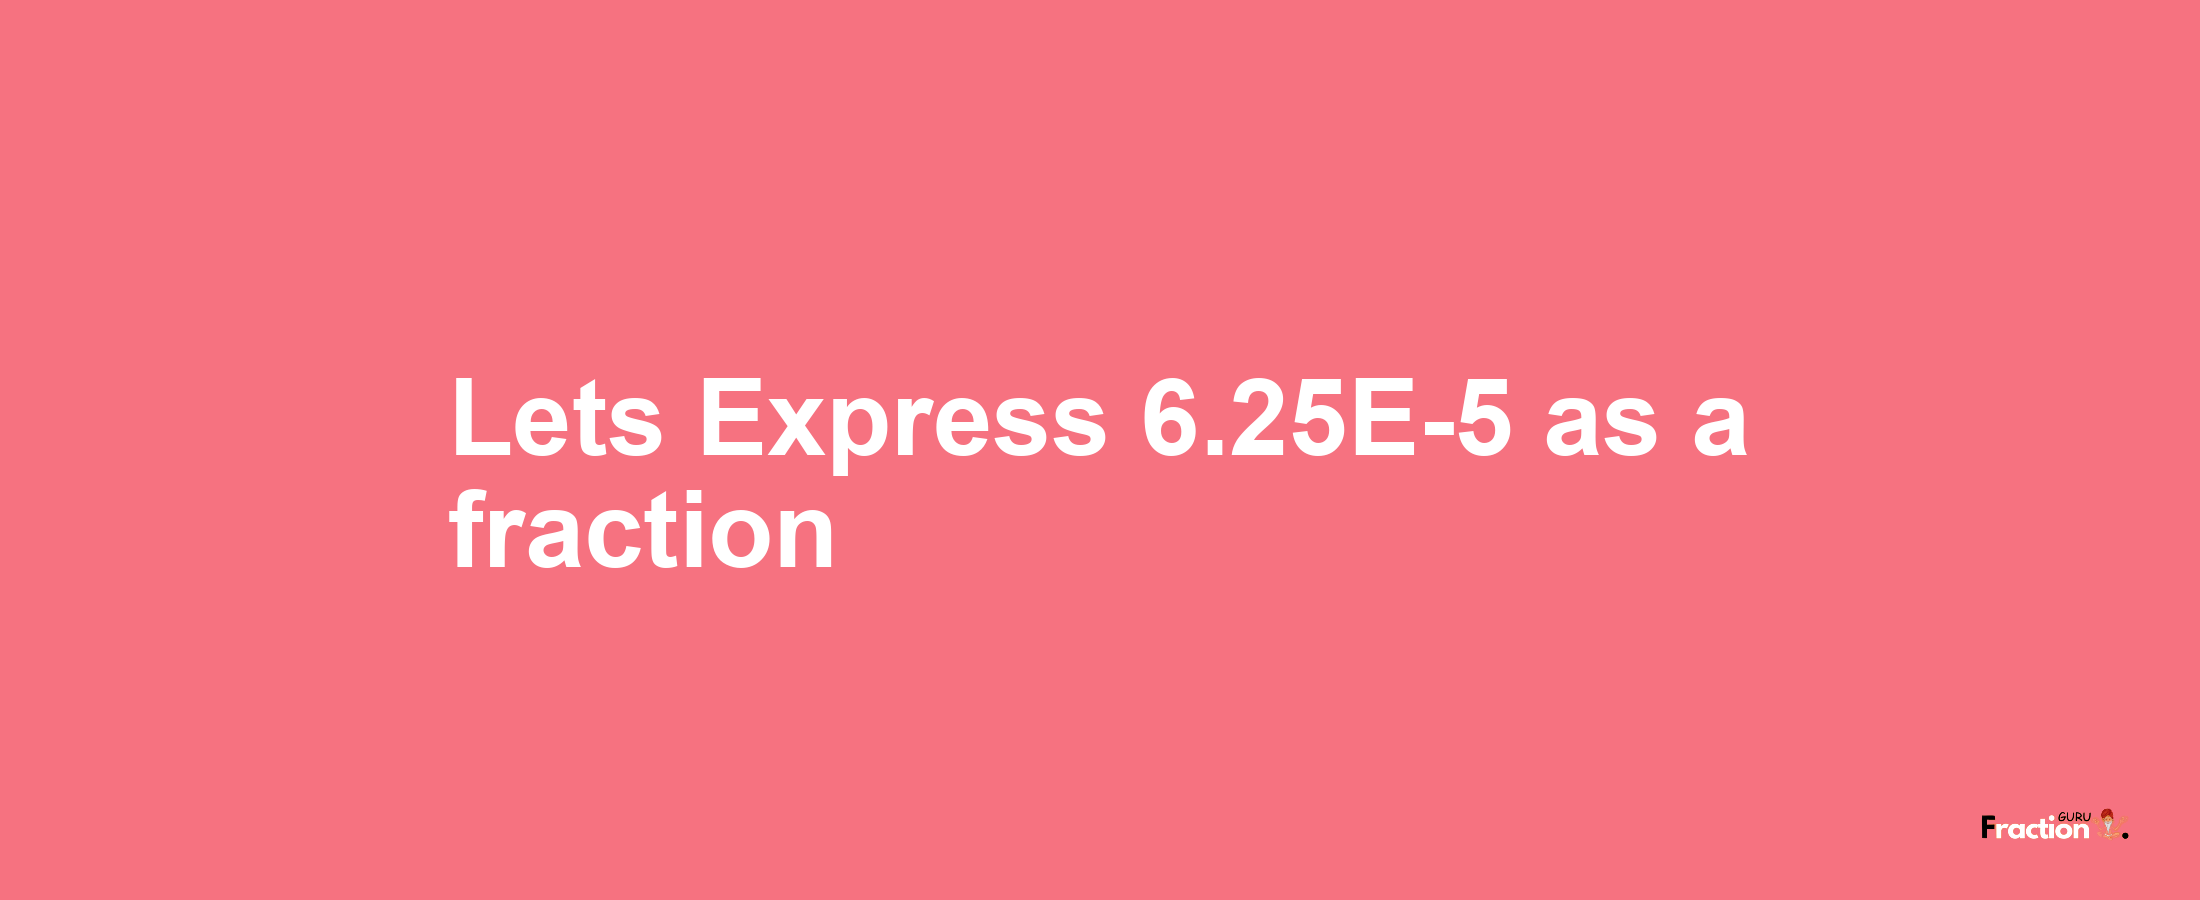 Lets Express 6.25E-5 as afraction